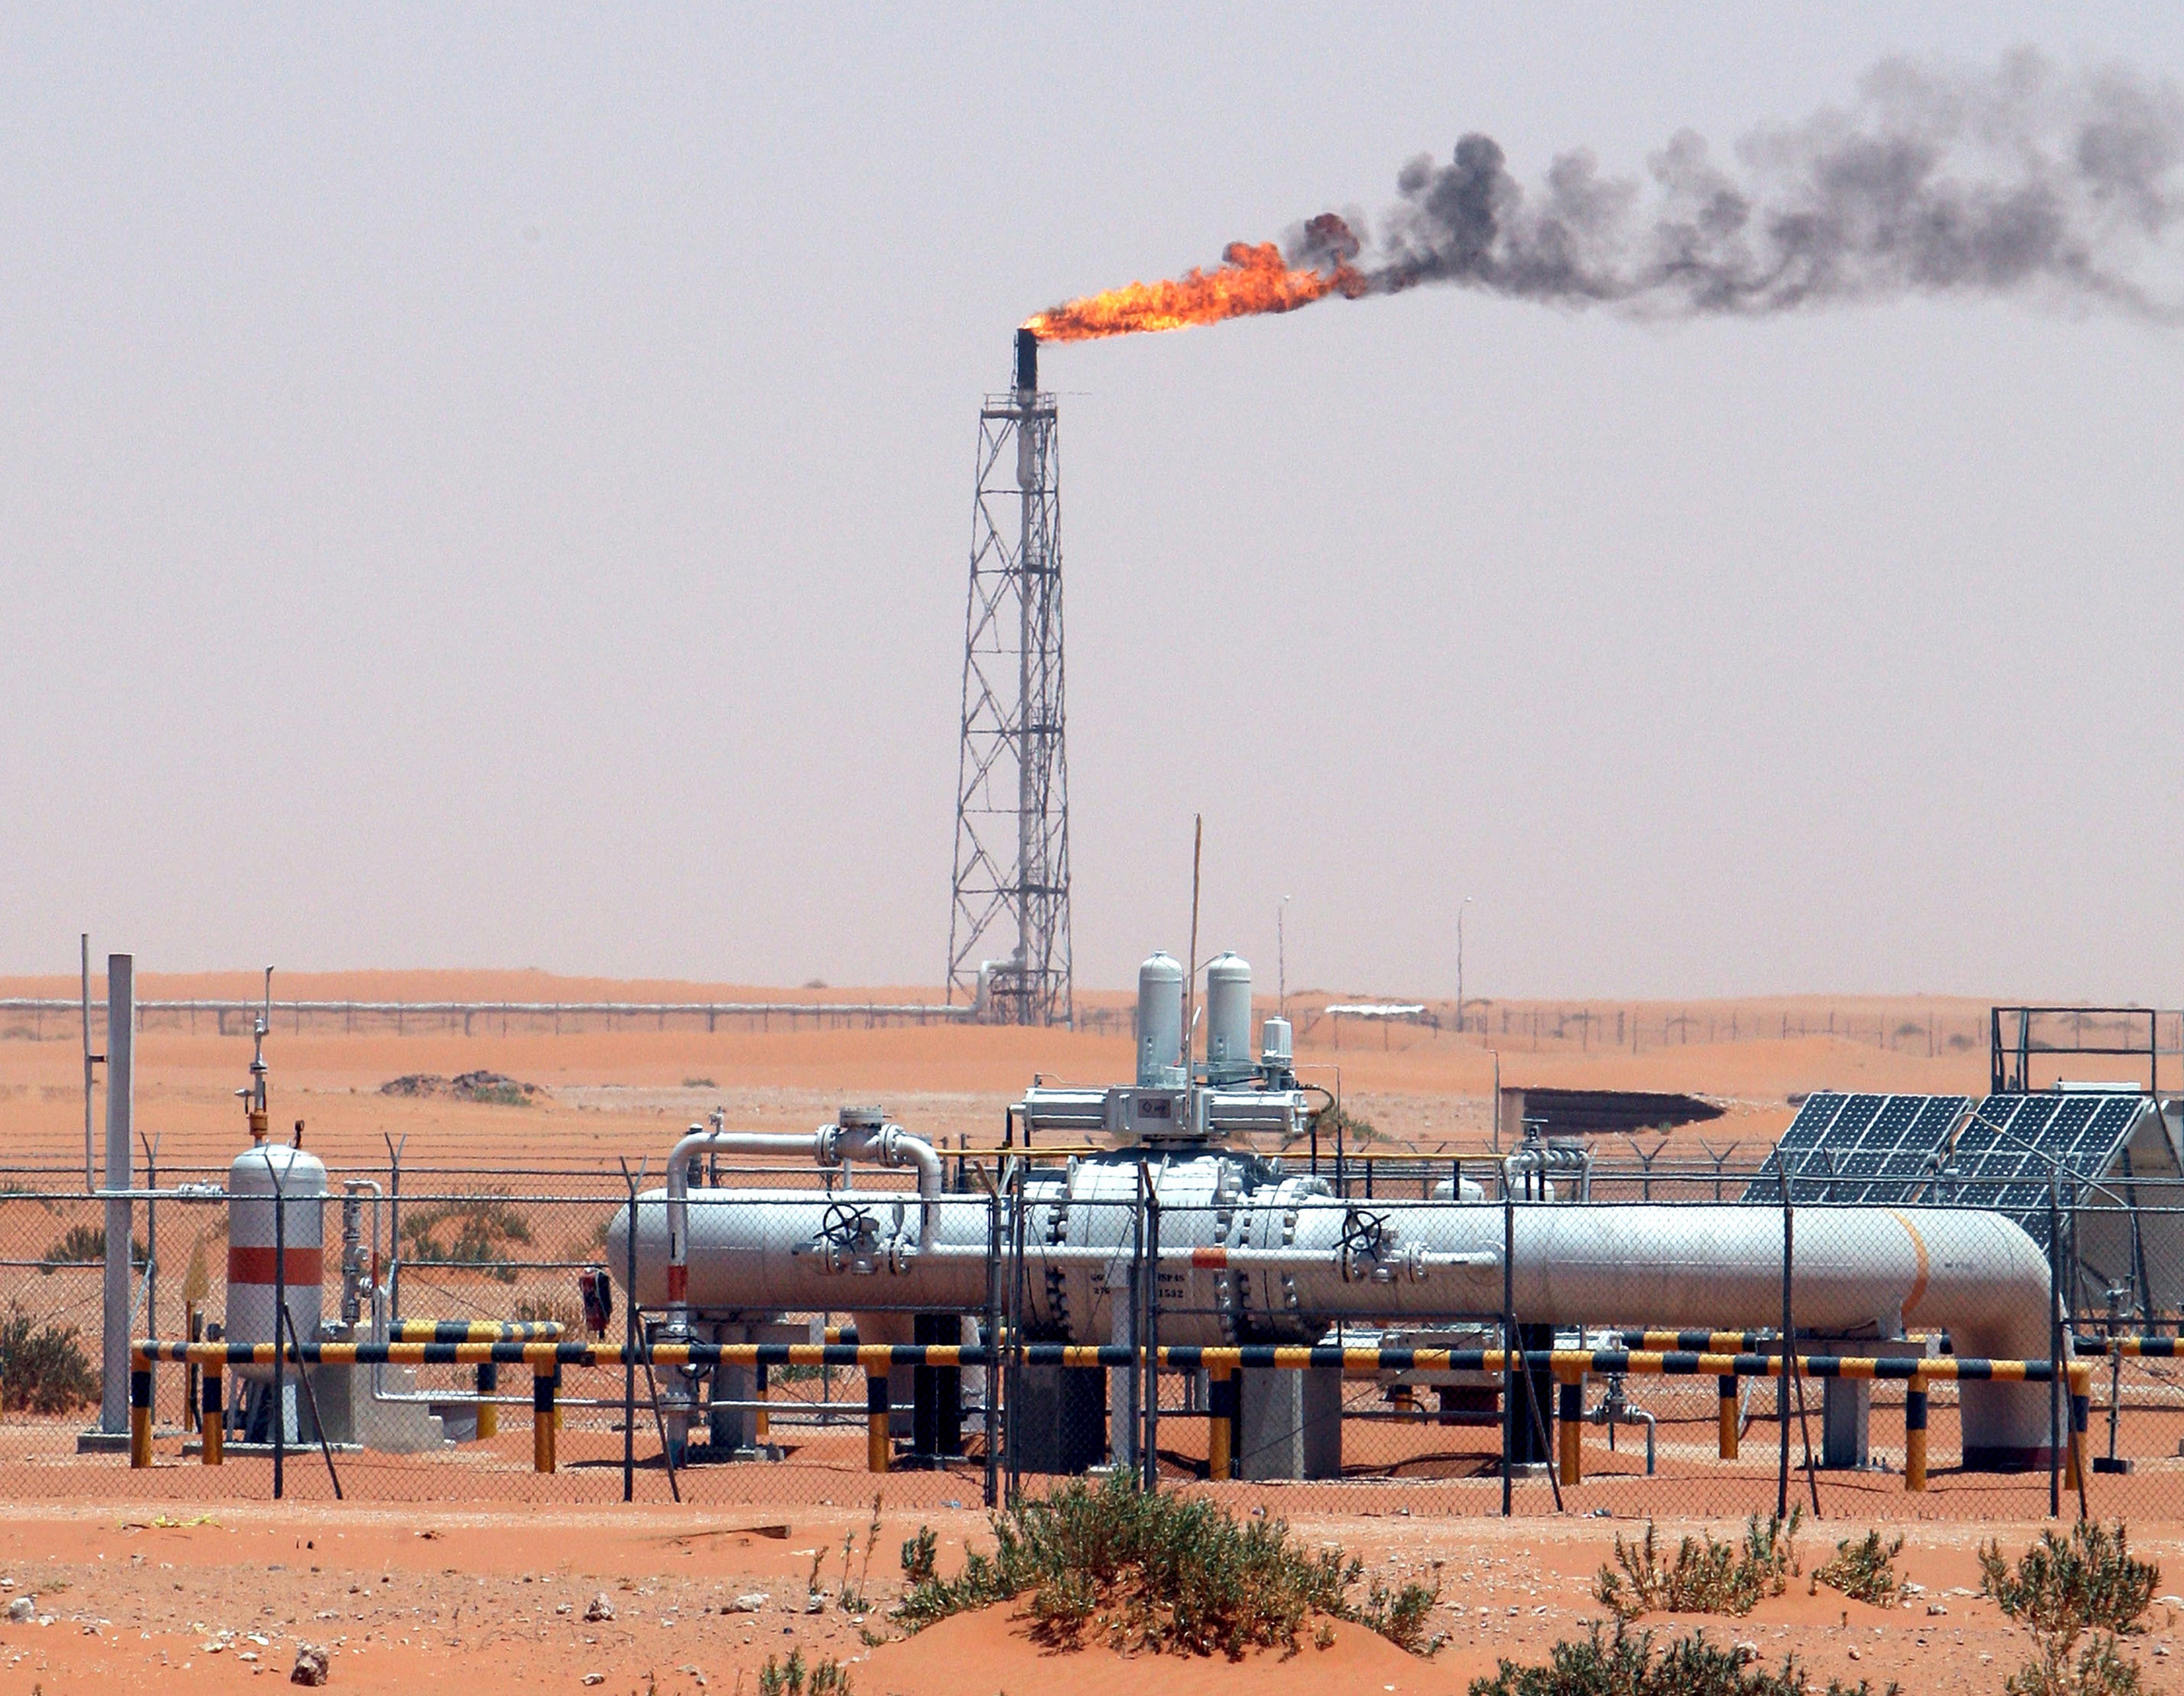 A flare stack burns off unwanted excess gas at the Khurais oil field in Saudi Arabia. Major producers such as Saudi Arabia and Russia are intensifying production cuts to support prices. Photo: EPA-EFE